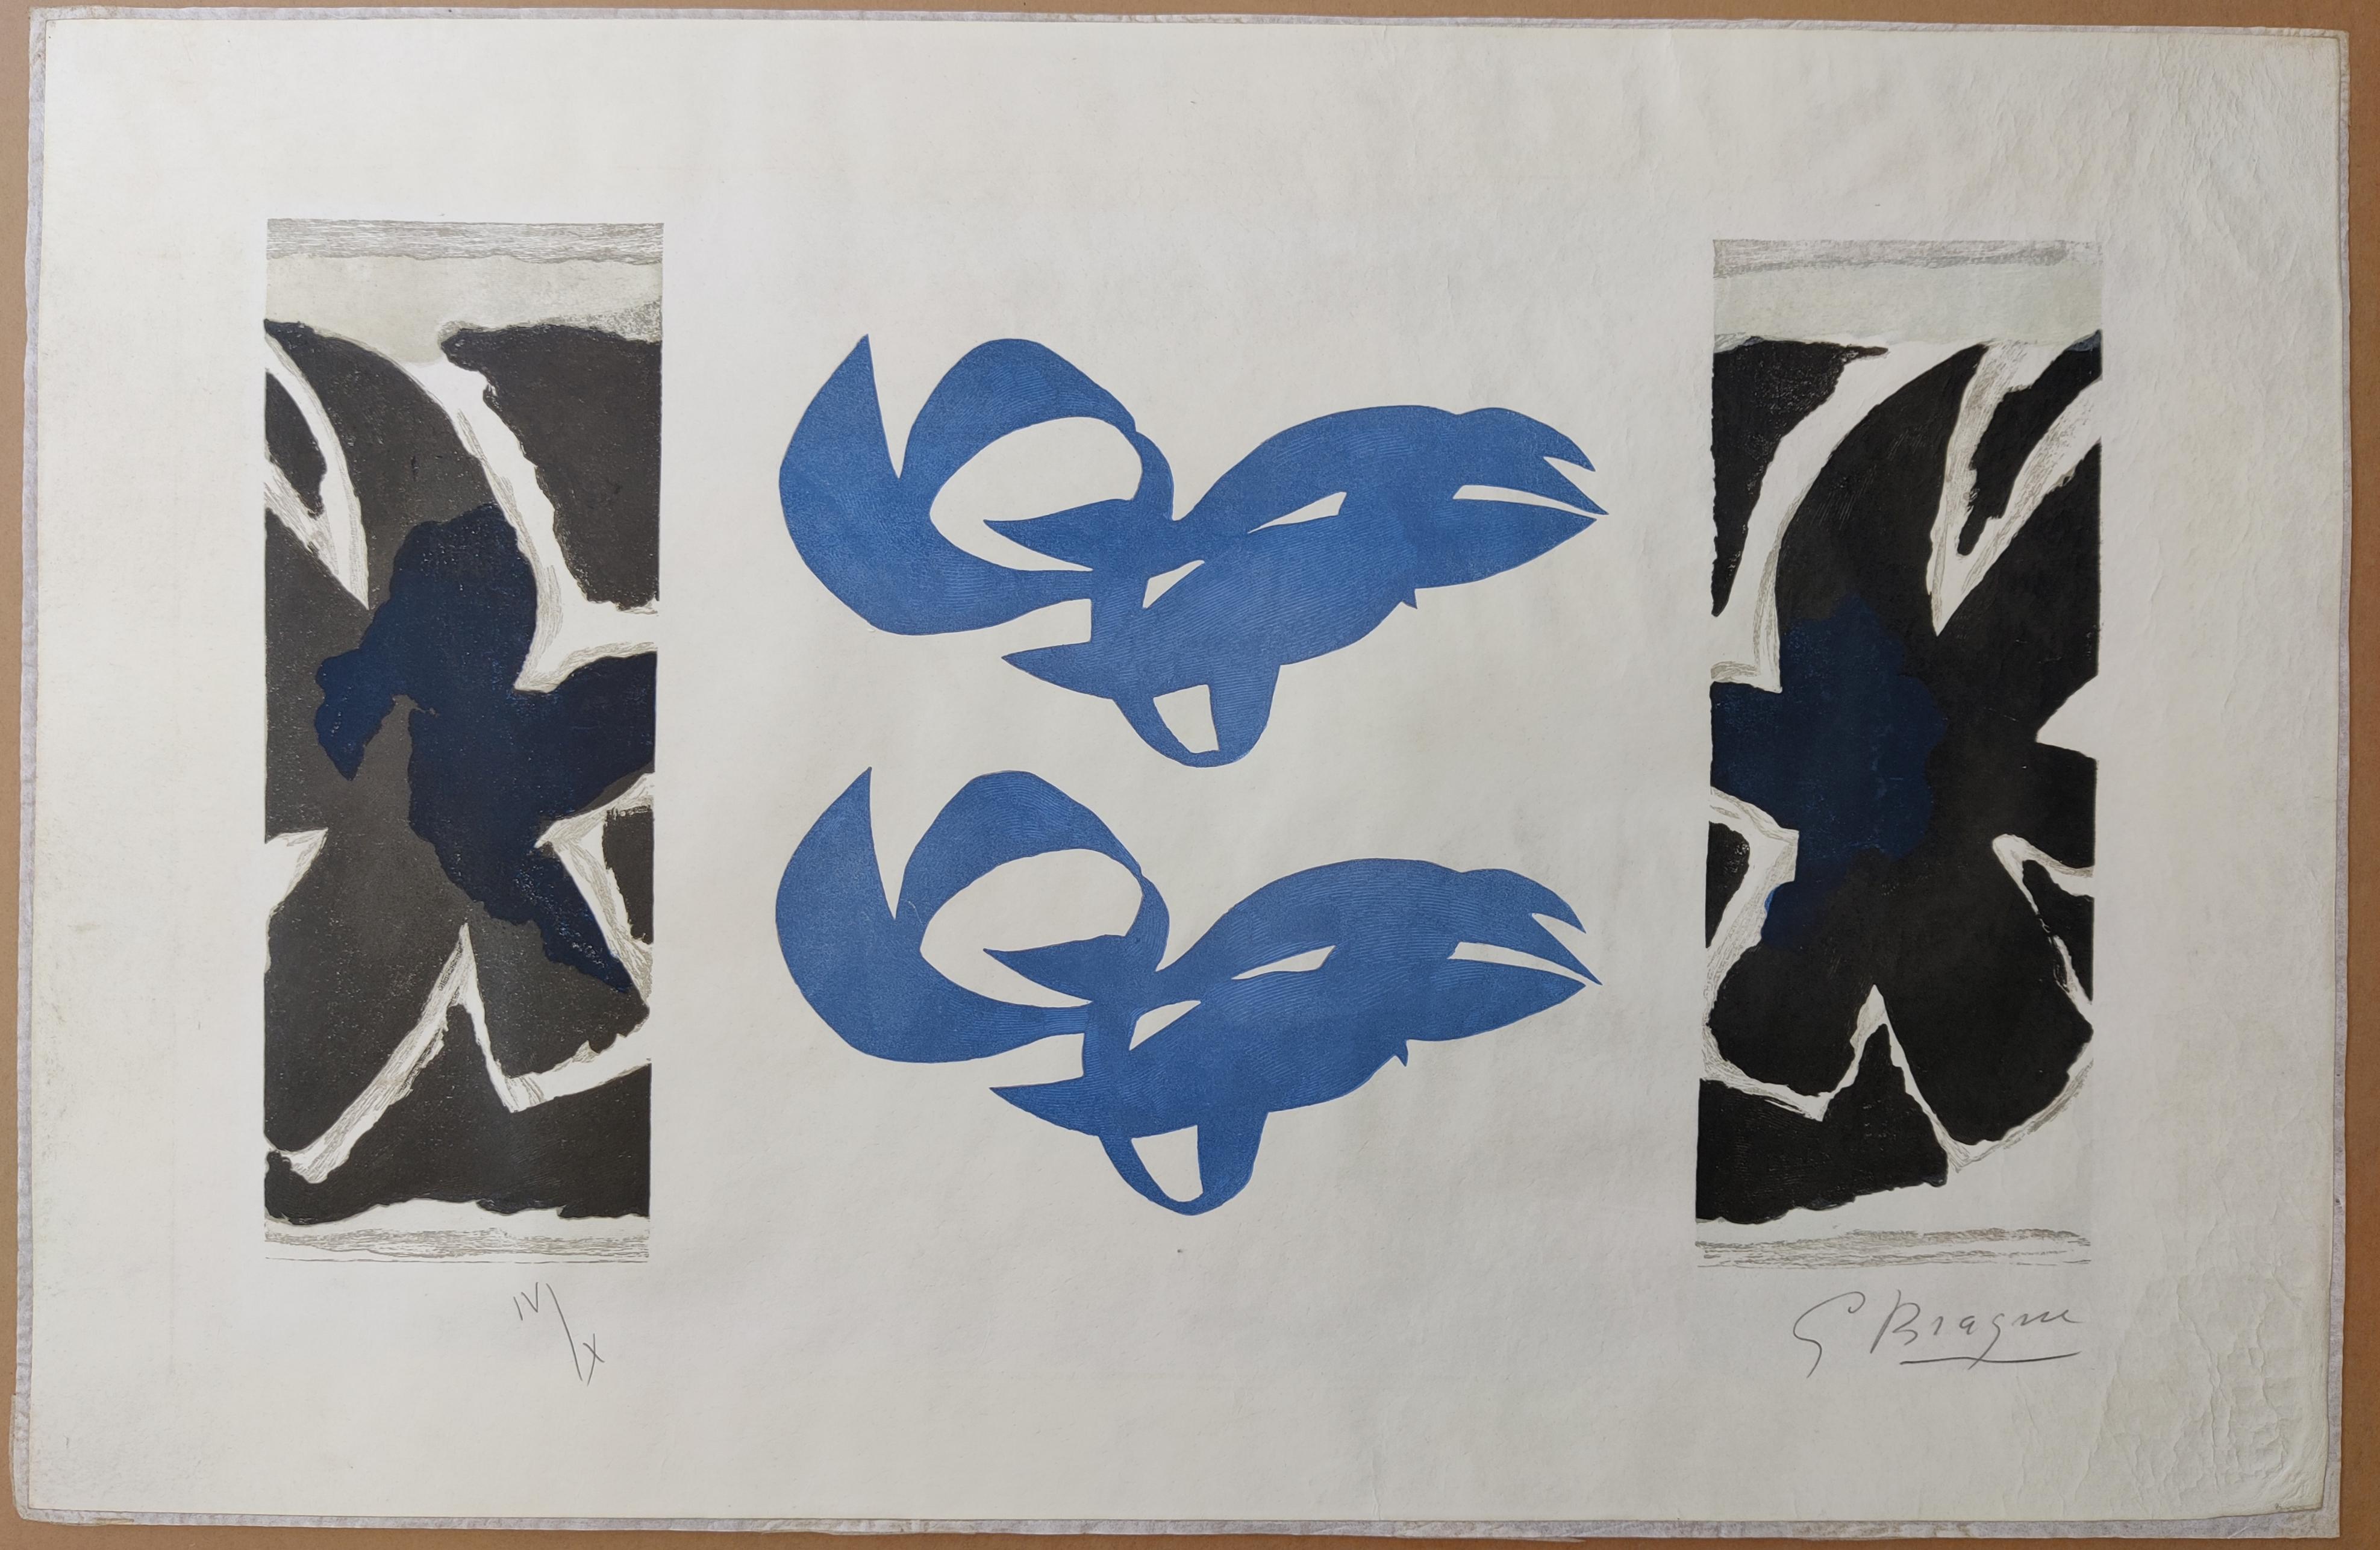 Georges Braque 
Si je mourais là-bas (If I Died There) (Vallier 181), 1962
Wood engraving printed in blue, on Japon paper
Hand signed lower right
Edition IV / X lower left
Printed by Féquet and Baudier, Paris. 
Published by Louis Broder, Paris. 
It